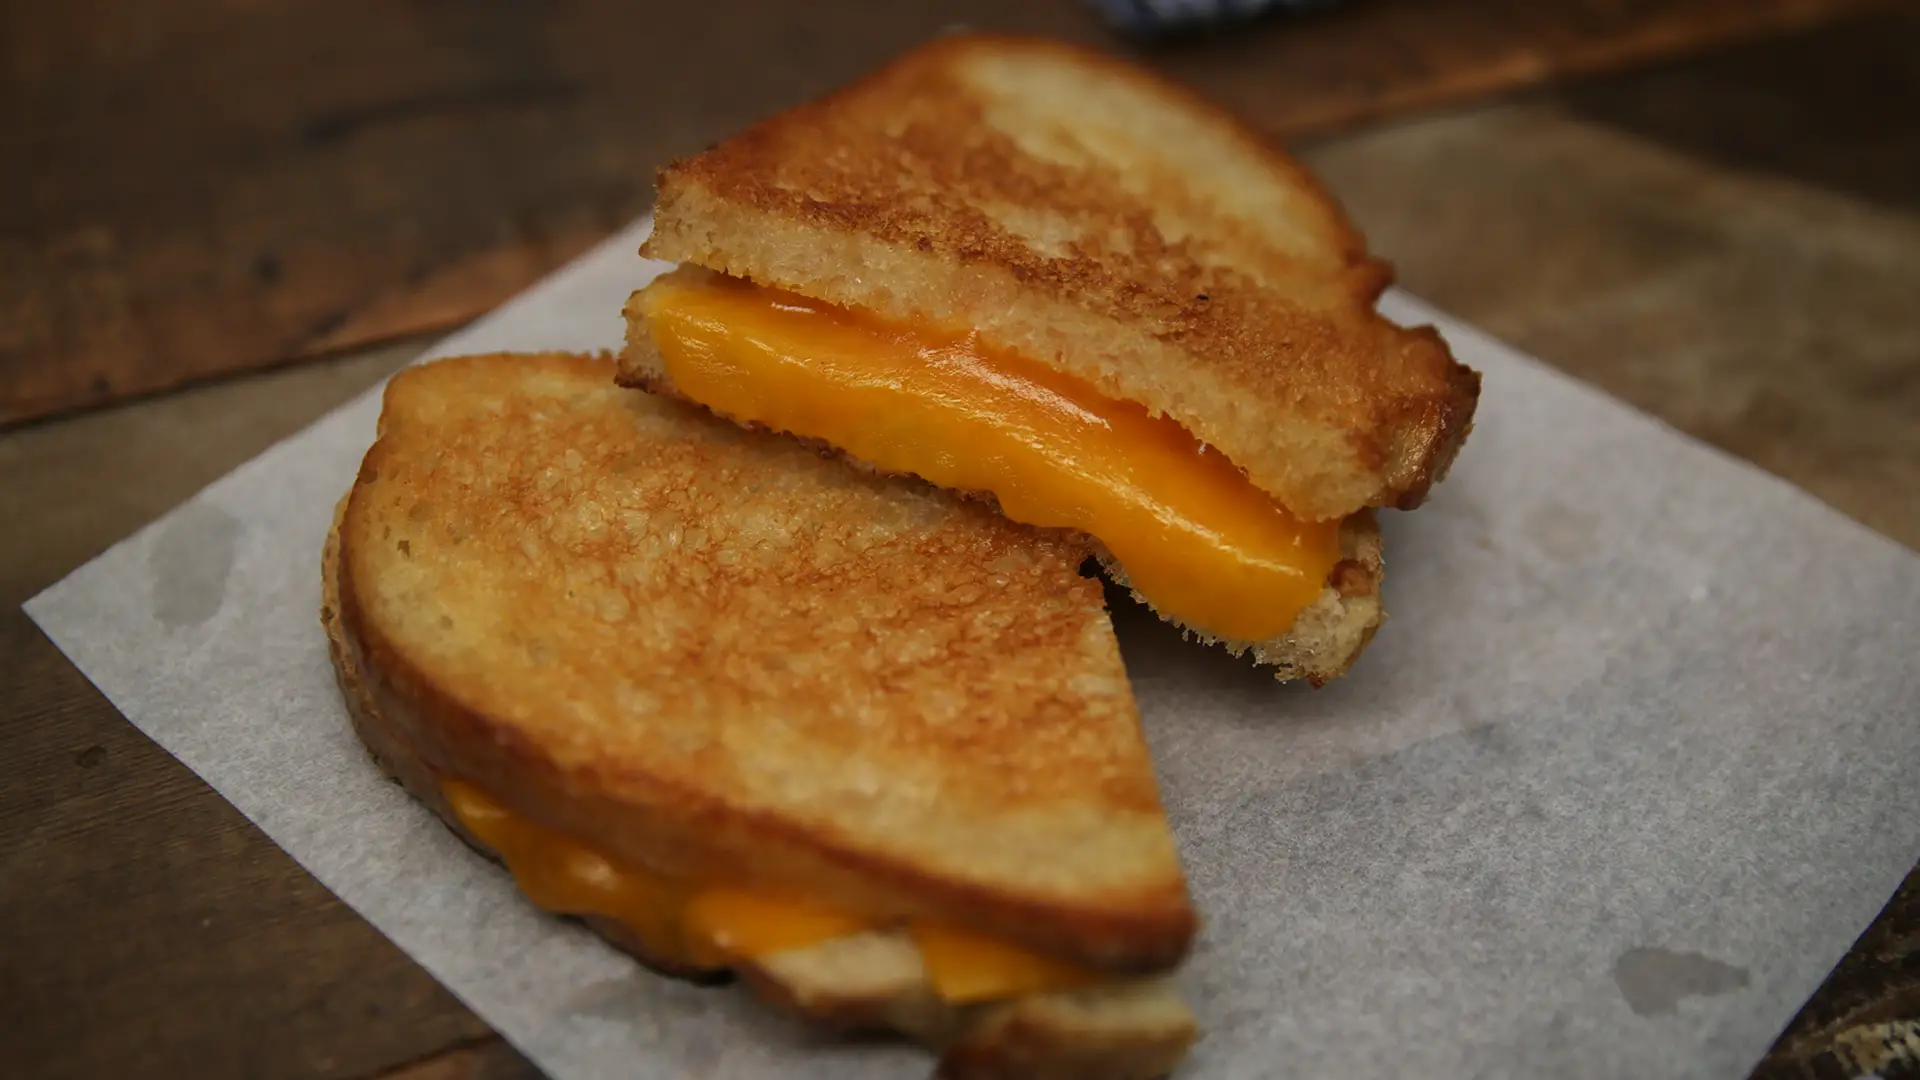 How To Make Grilled Cheese With Mayo